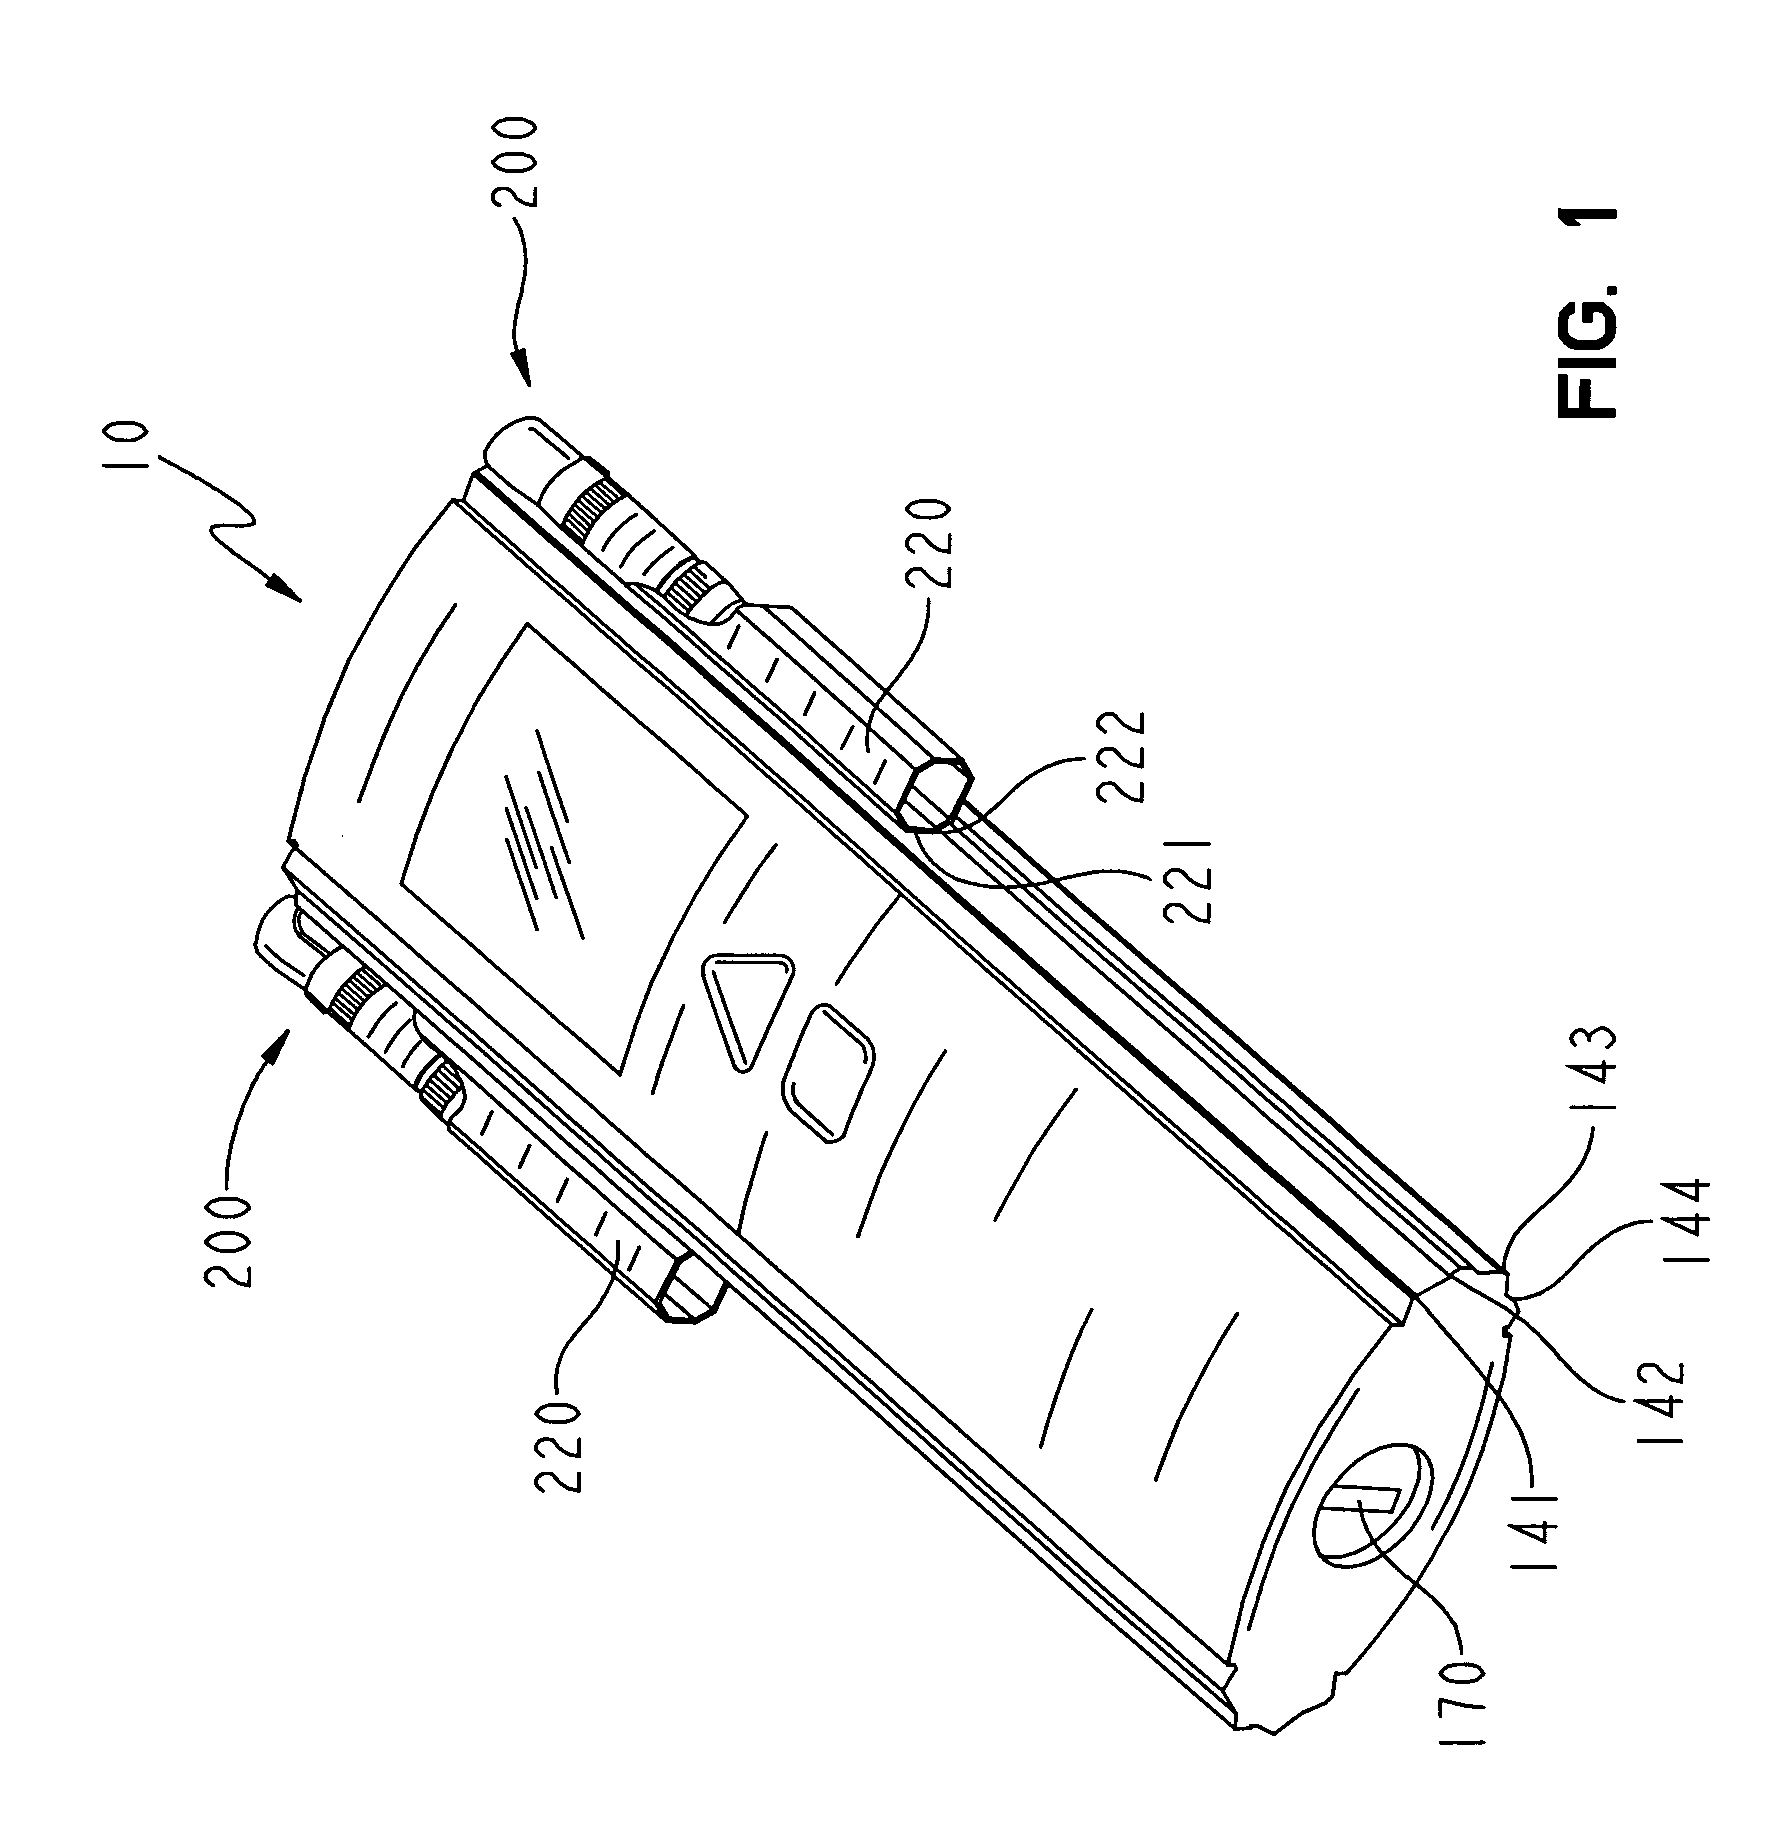 Methods and apparatus for analyzing an analysis fluid